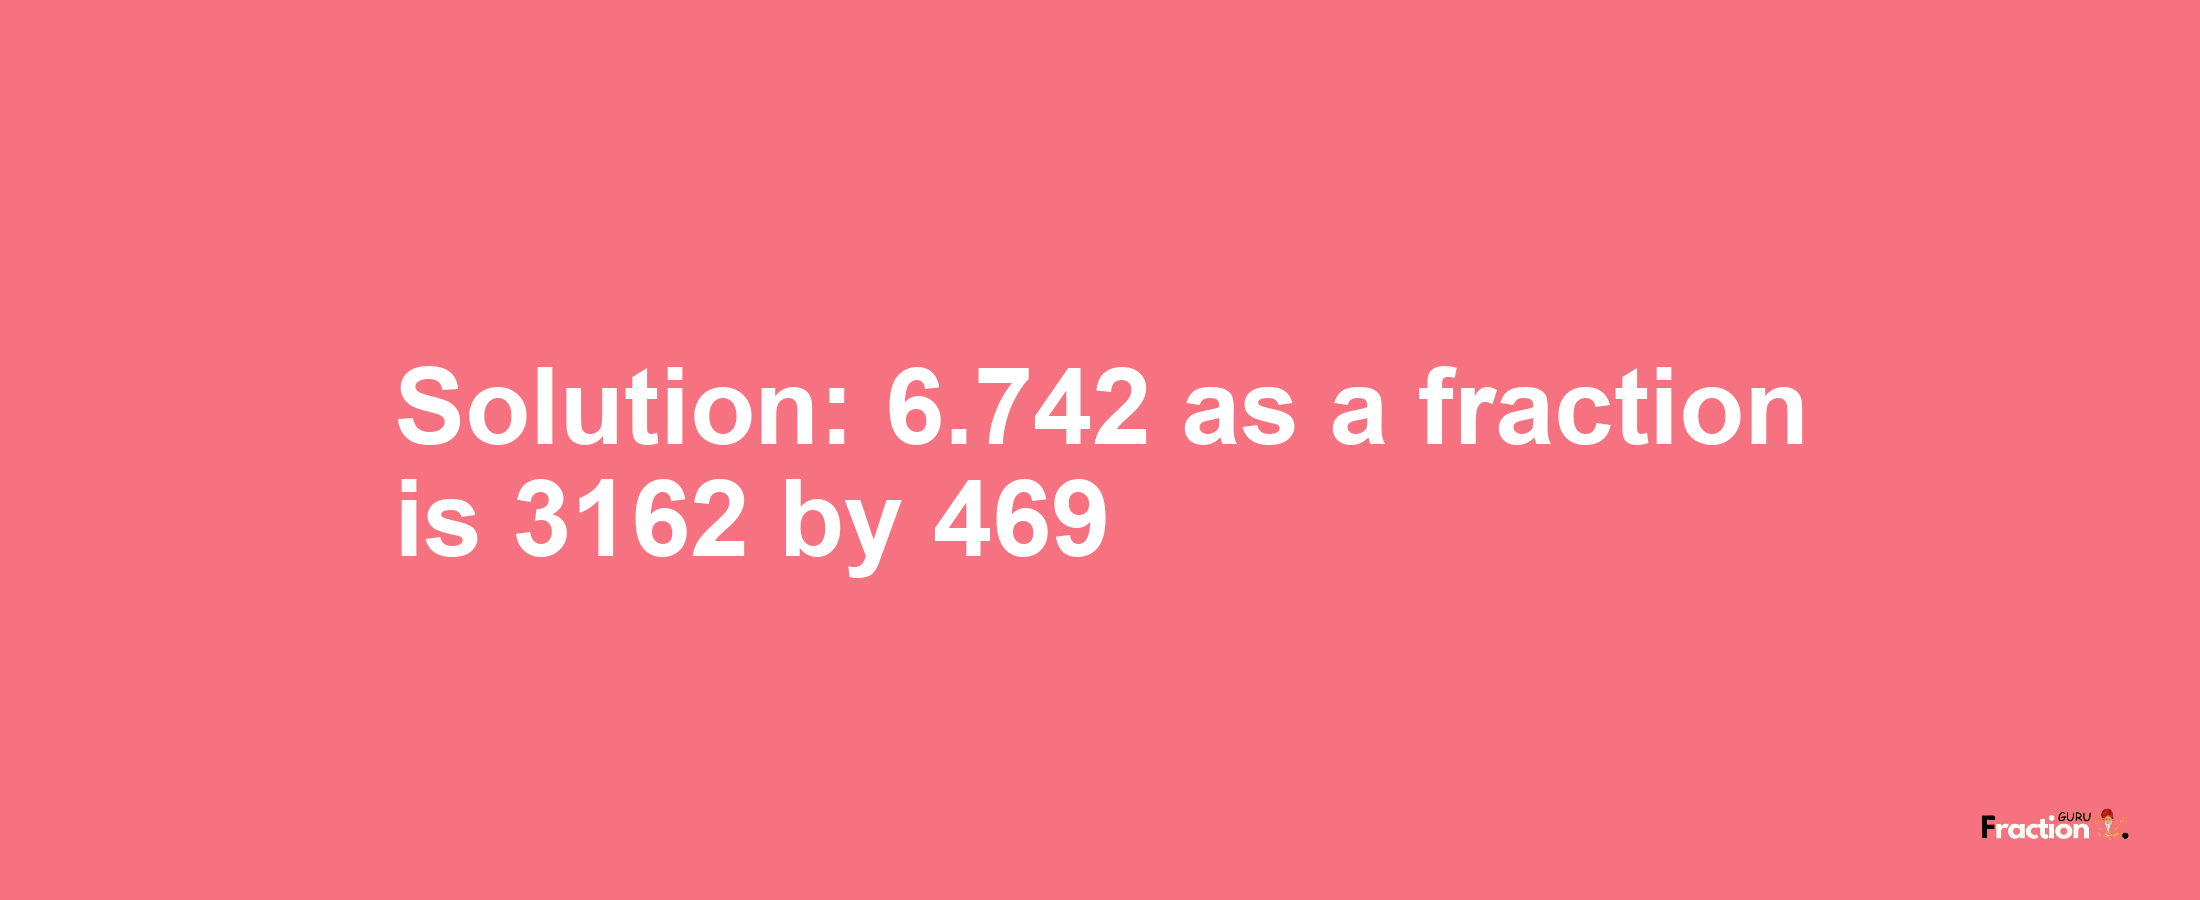 Solution:6.742 as a fraction is 3162/469